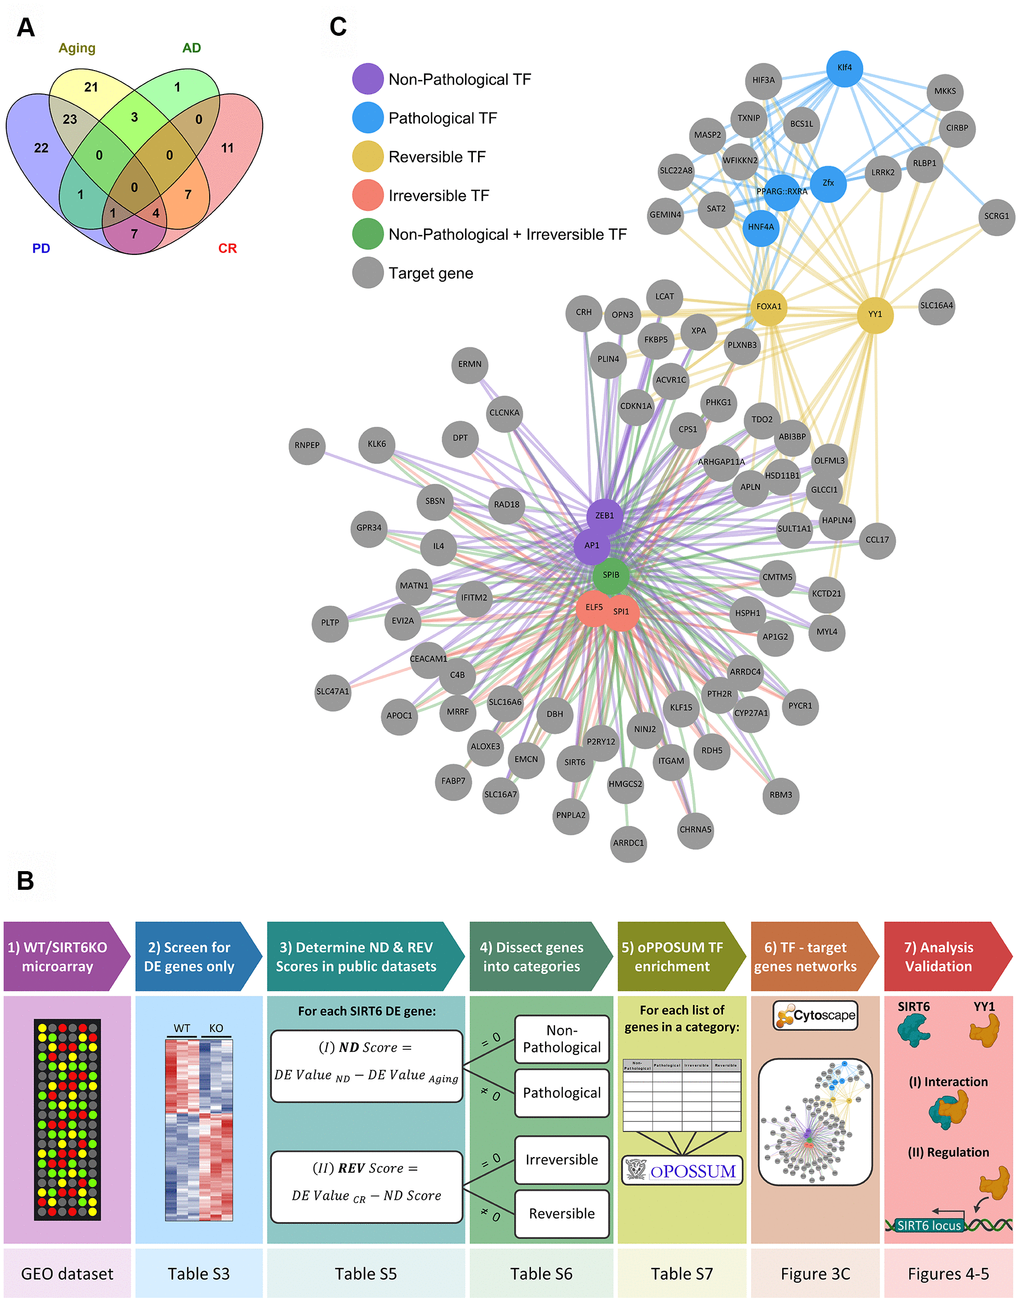 Selected hubs of brain signature categories. (A) Venn diagram for SIRT6 target genes differentially expressed also in Aging, Alzheimer's disease (AD), Parkinson's disease (PD), or Aged samples under Calorie Restriction (CR) datasets. Numbers represent the number of genes in each section, which change in at least one dataset of a certain group of datasets. (B) A scheme of genes analysis pipeline. The lower panels note the Table/Figure in which the results can be found for each step. DE gene – differentially expressed gene; ND and REV Scores – Neurodegeneration and Reversibility Scores; TF – transcription factor. Figure was created with BioRender.com. (C) Manually chosen TFs (out of the top TFs per signature category) and their target genes represent the hubs of brain signature categories.